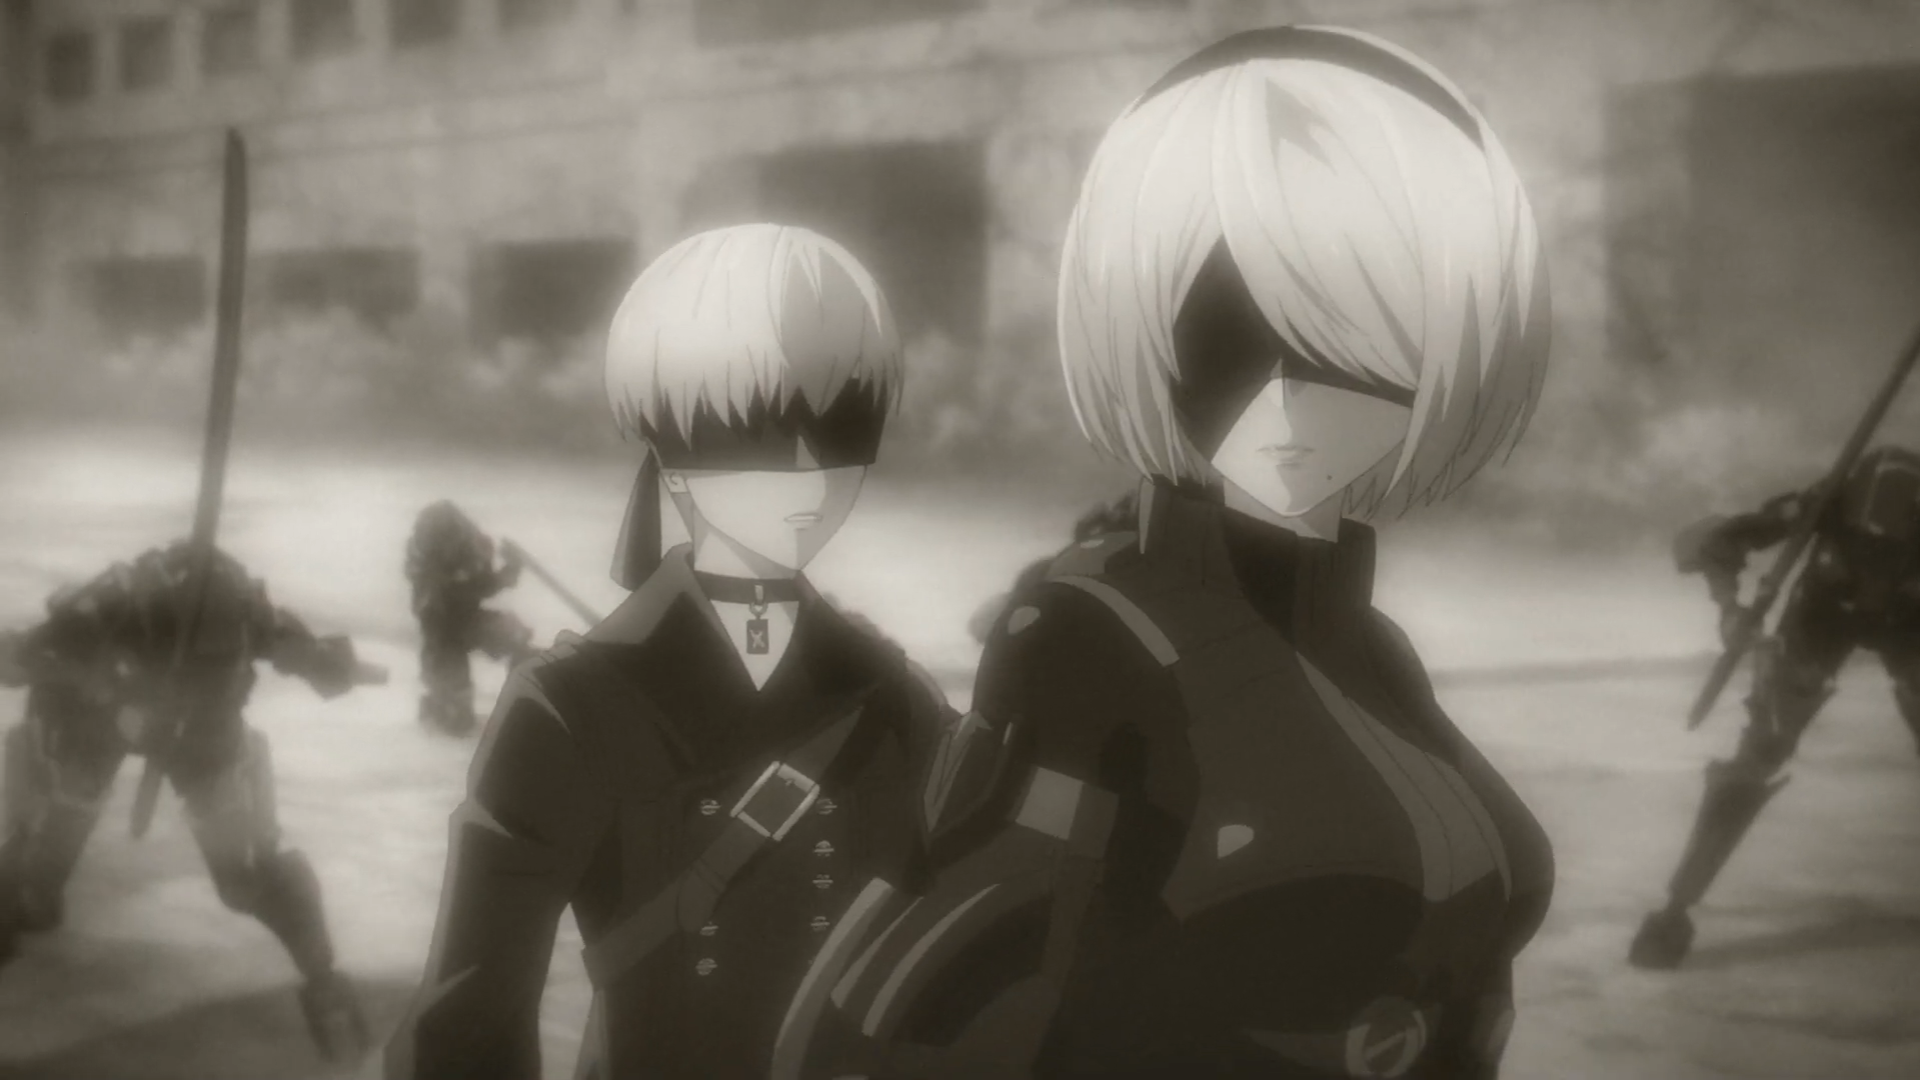 NieR:Automata Ver1.1a or not to [B]e - Watch on Crunchyroll